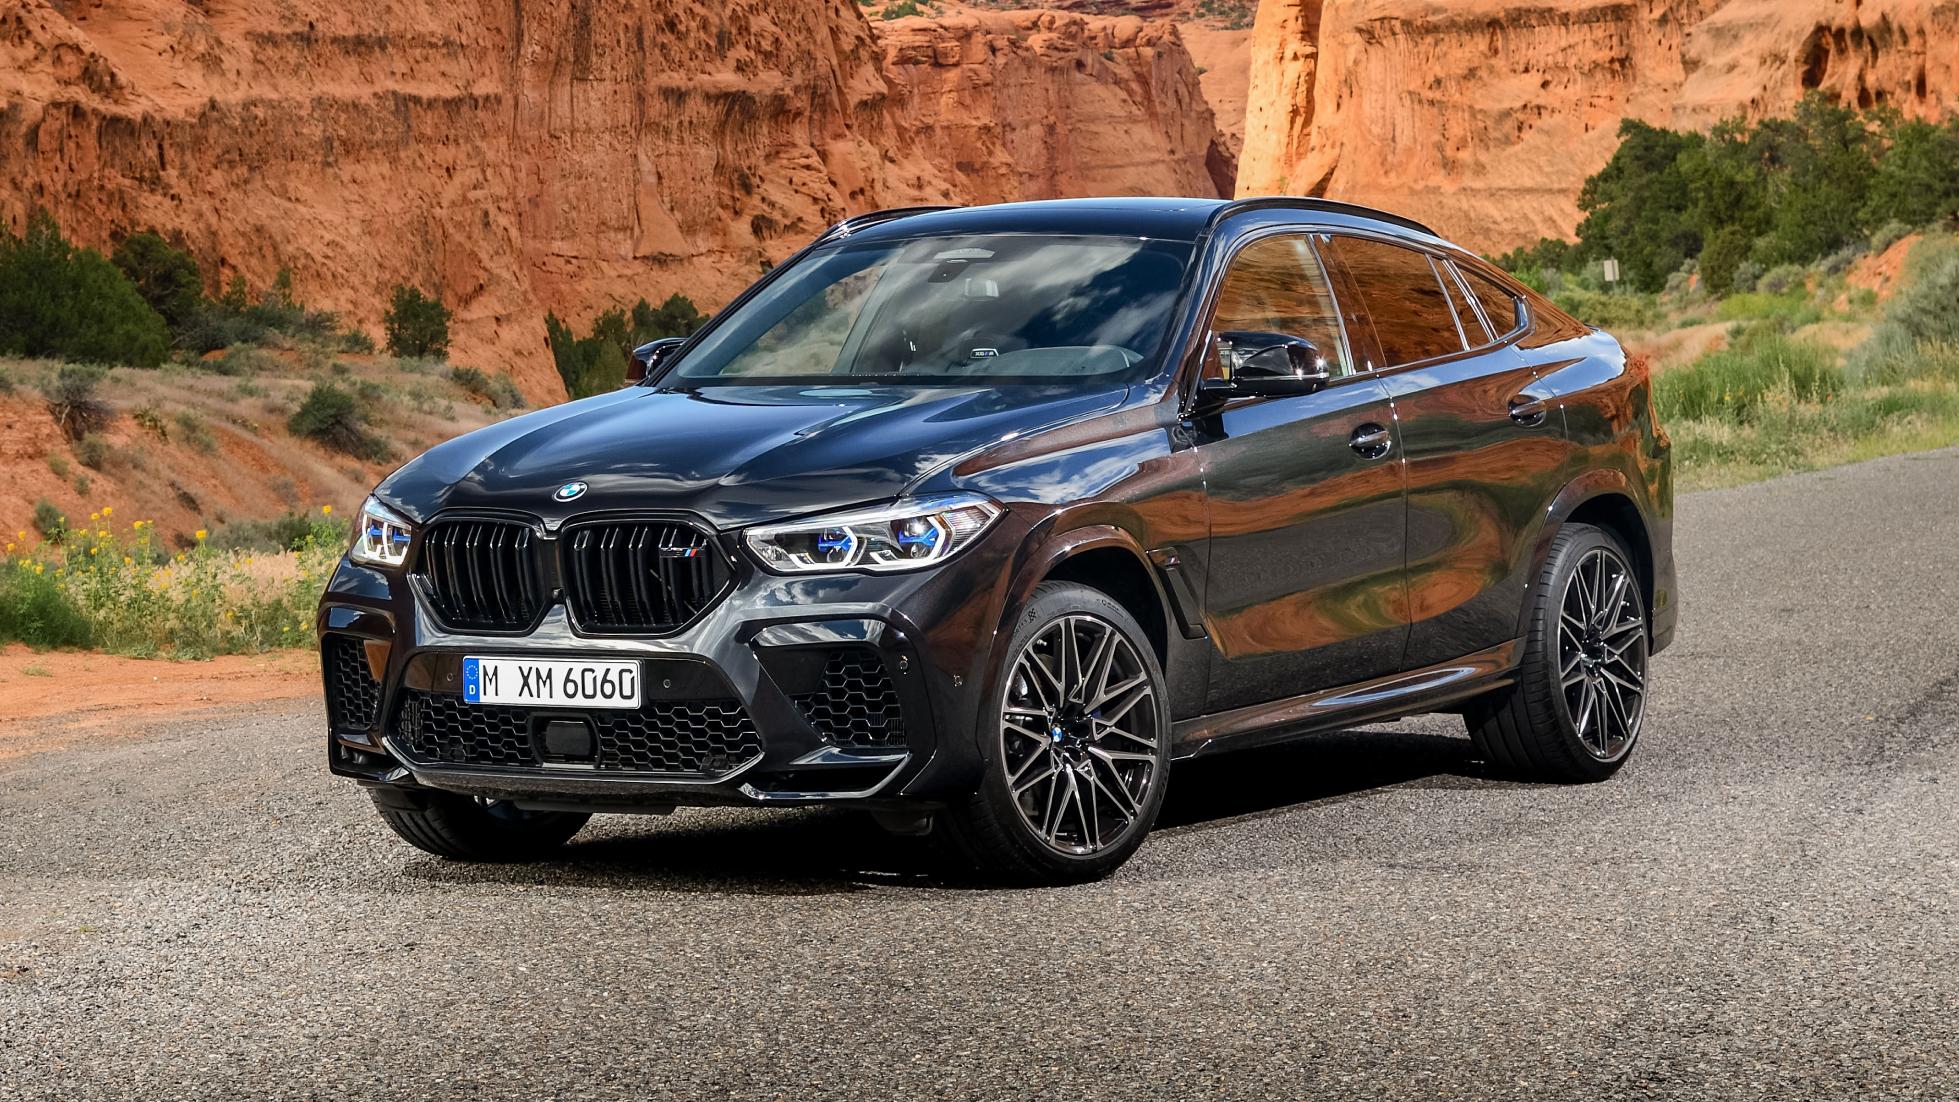 TopGear | Here are BMW's new X5 M and X6 M Competition cars